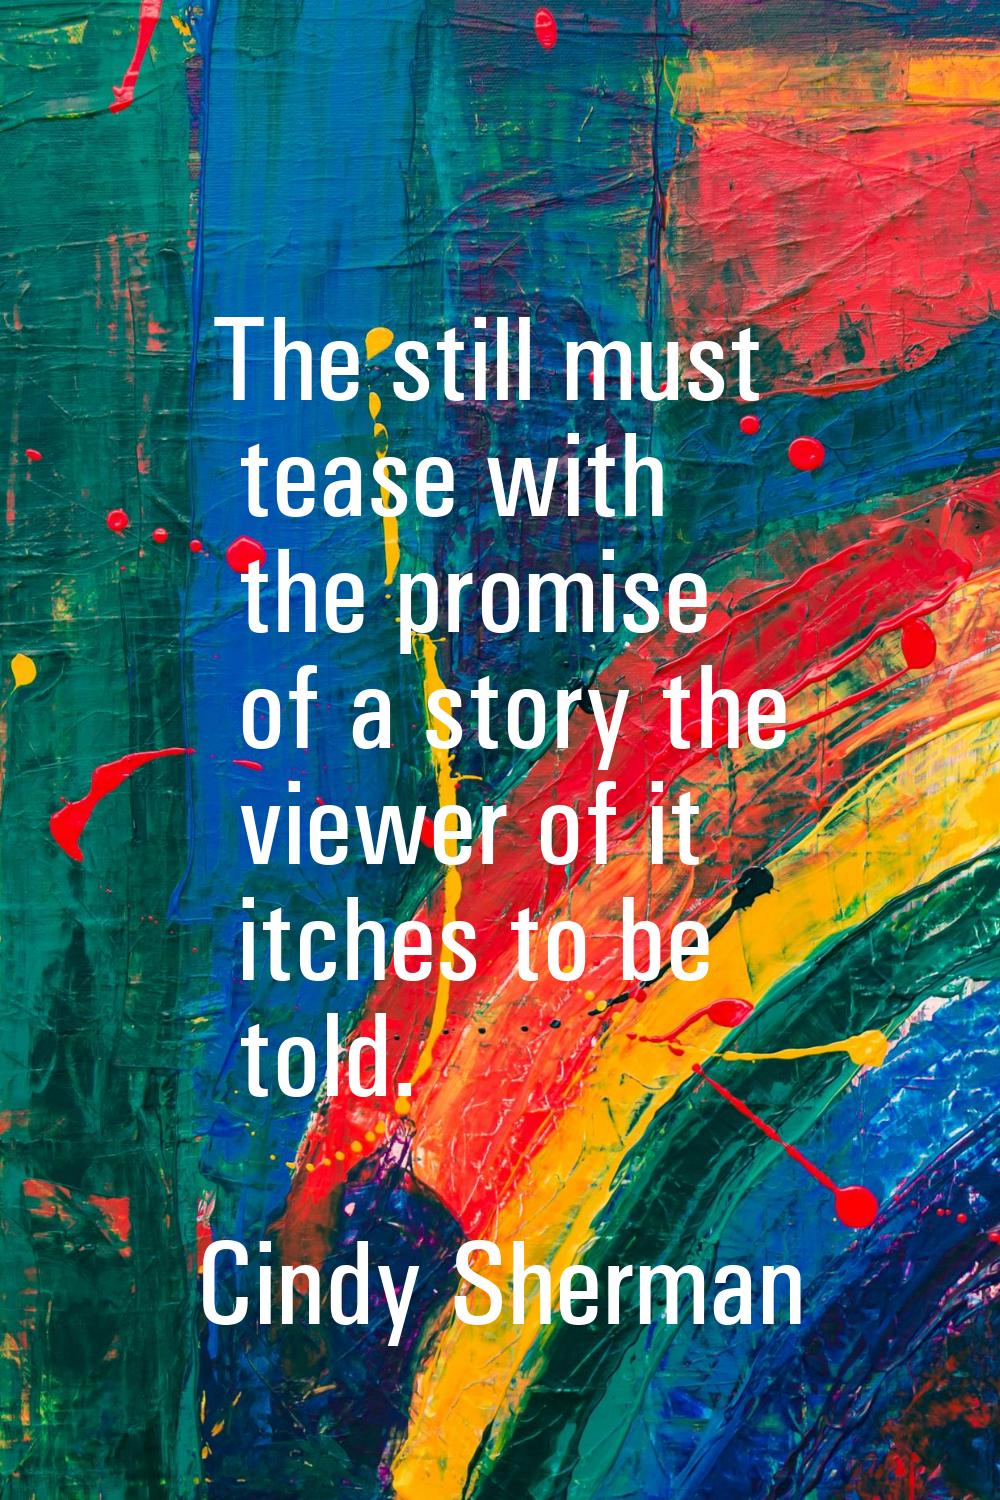 The still must tease with the promise of a story the viewer of it itches to be told.